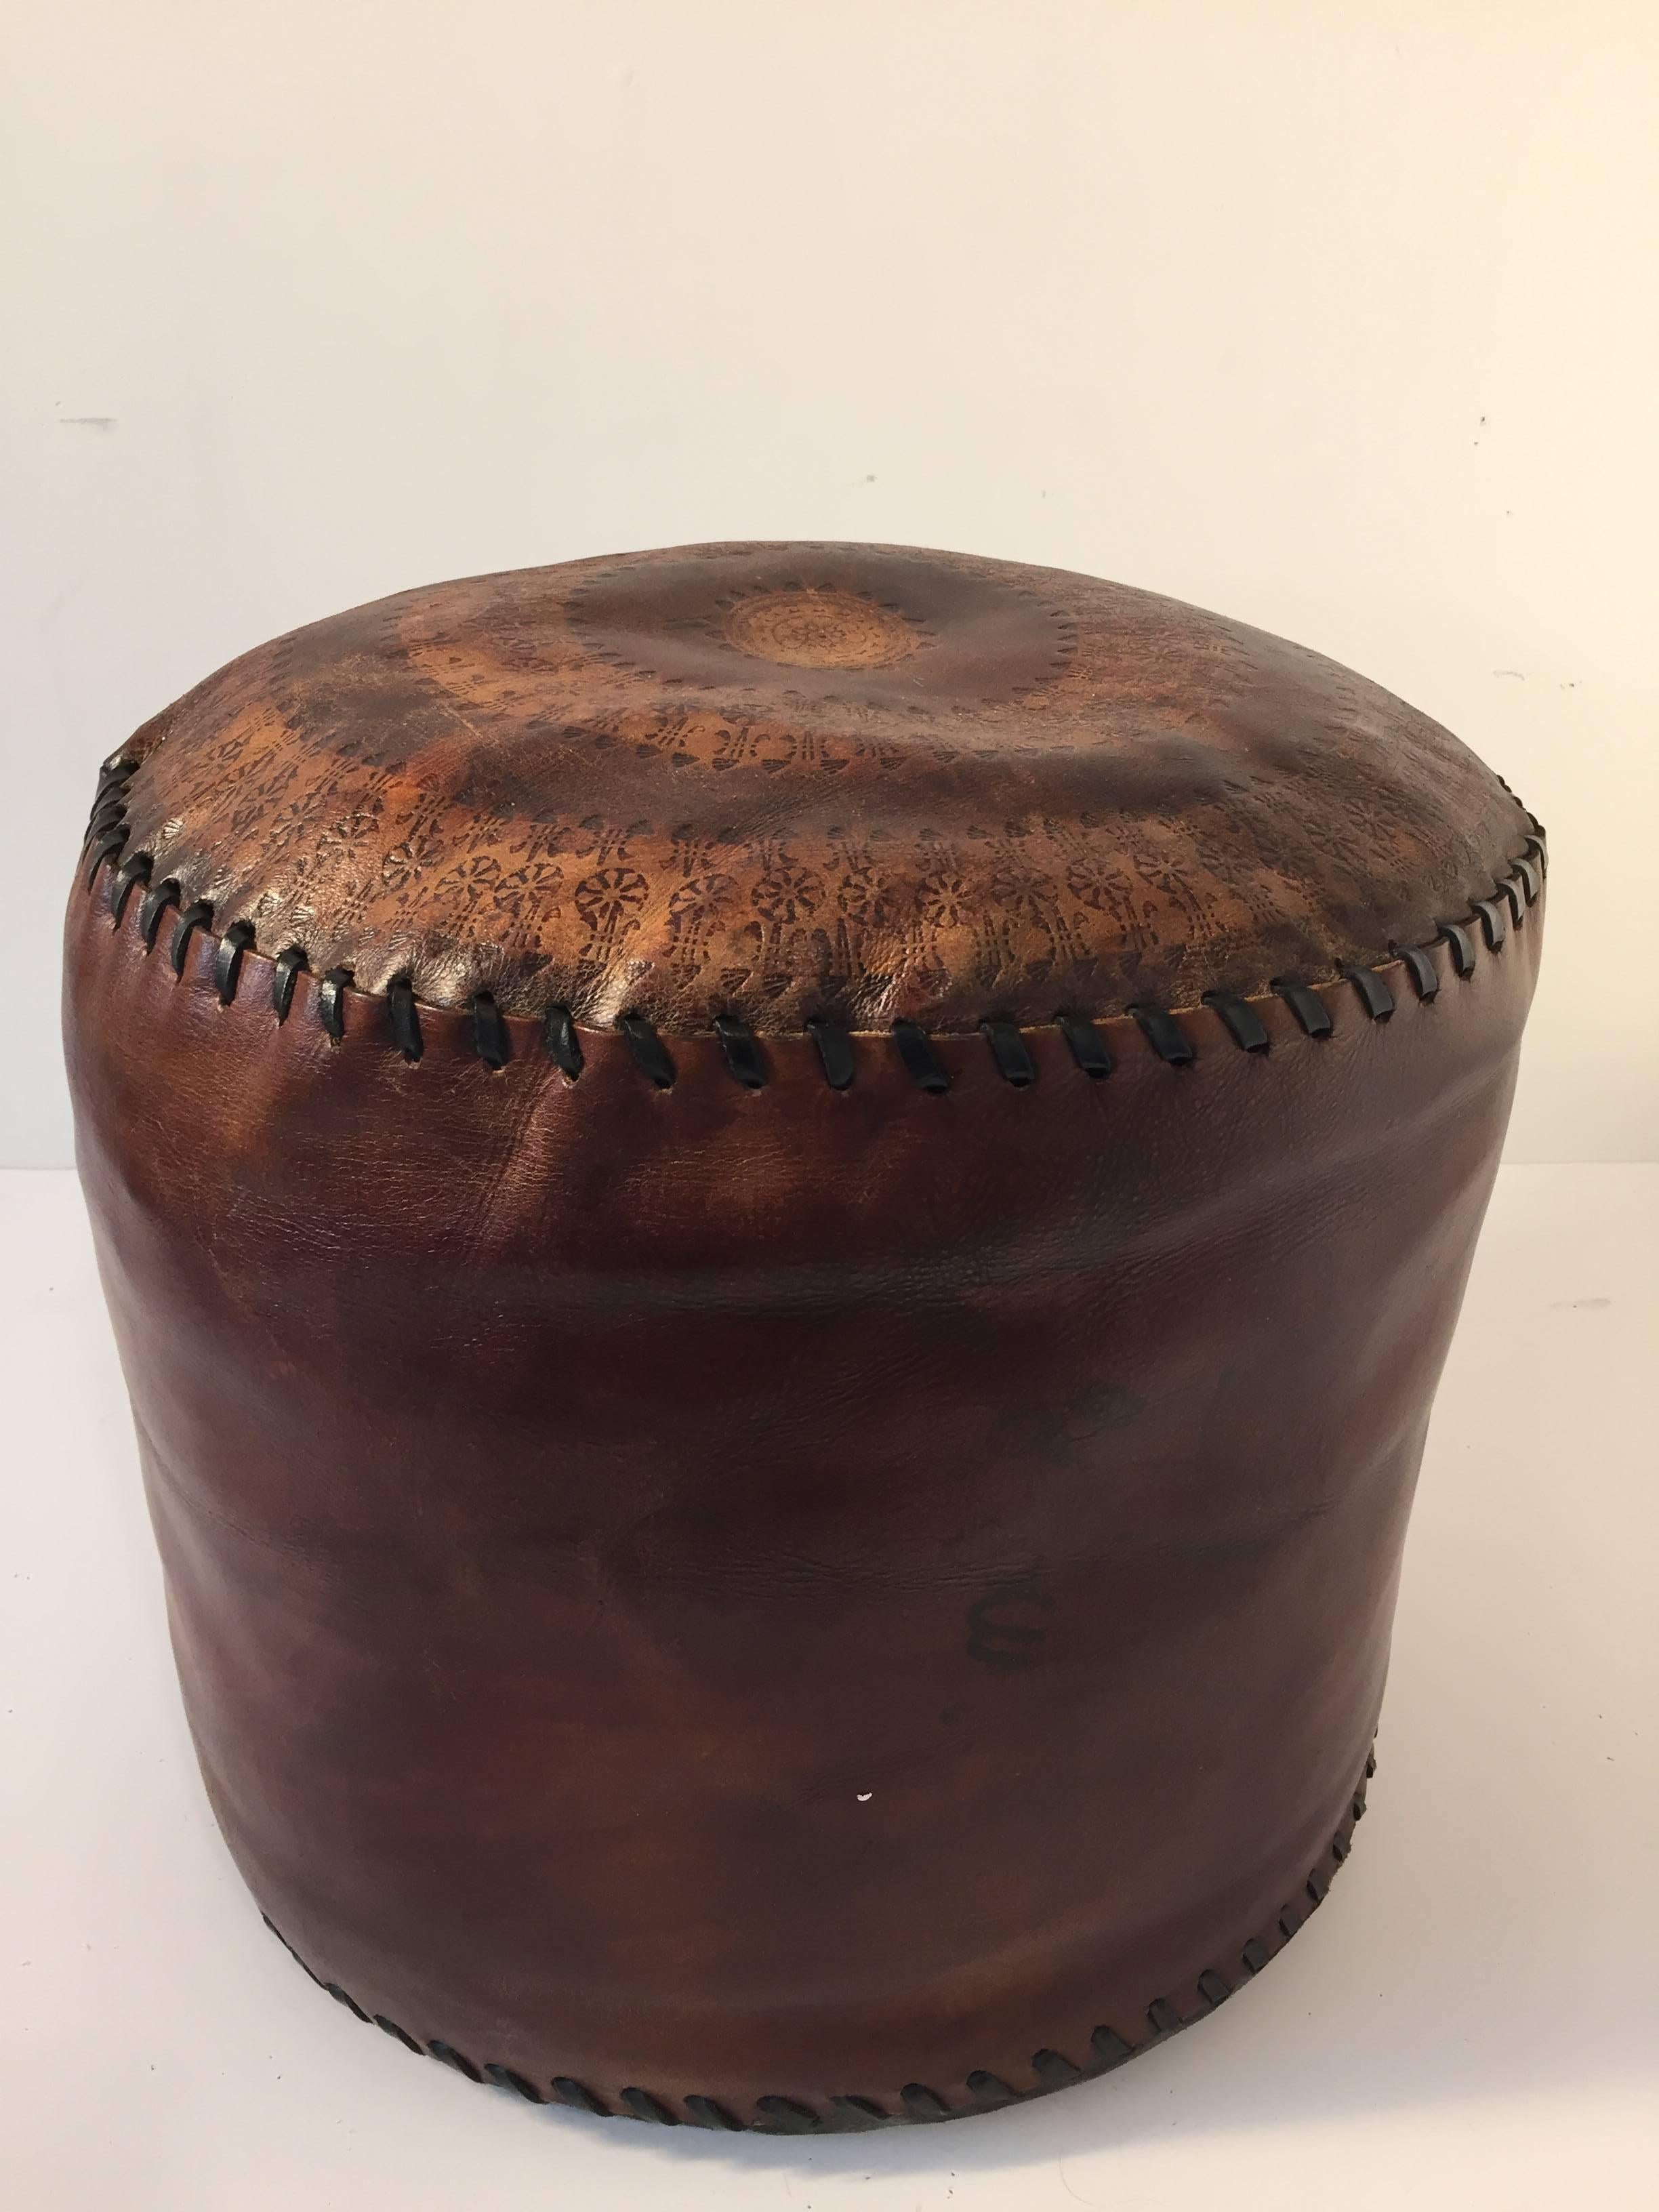 Vintage hand tooled African brown leather pouf.
Nice dark patinated leather with flat top embossed with tribal design and two-tone brown colors.
Size: 16 in. D x 15 in H.